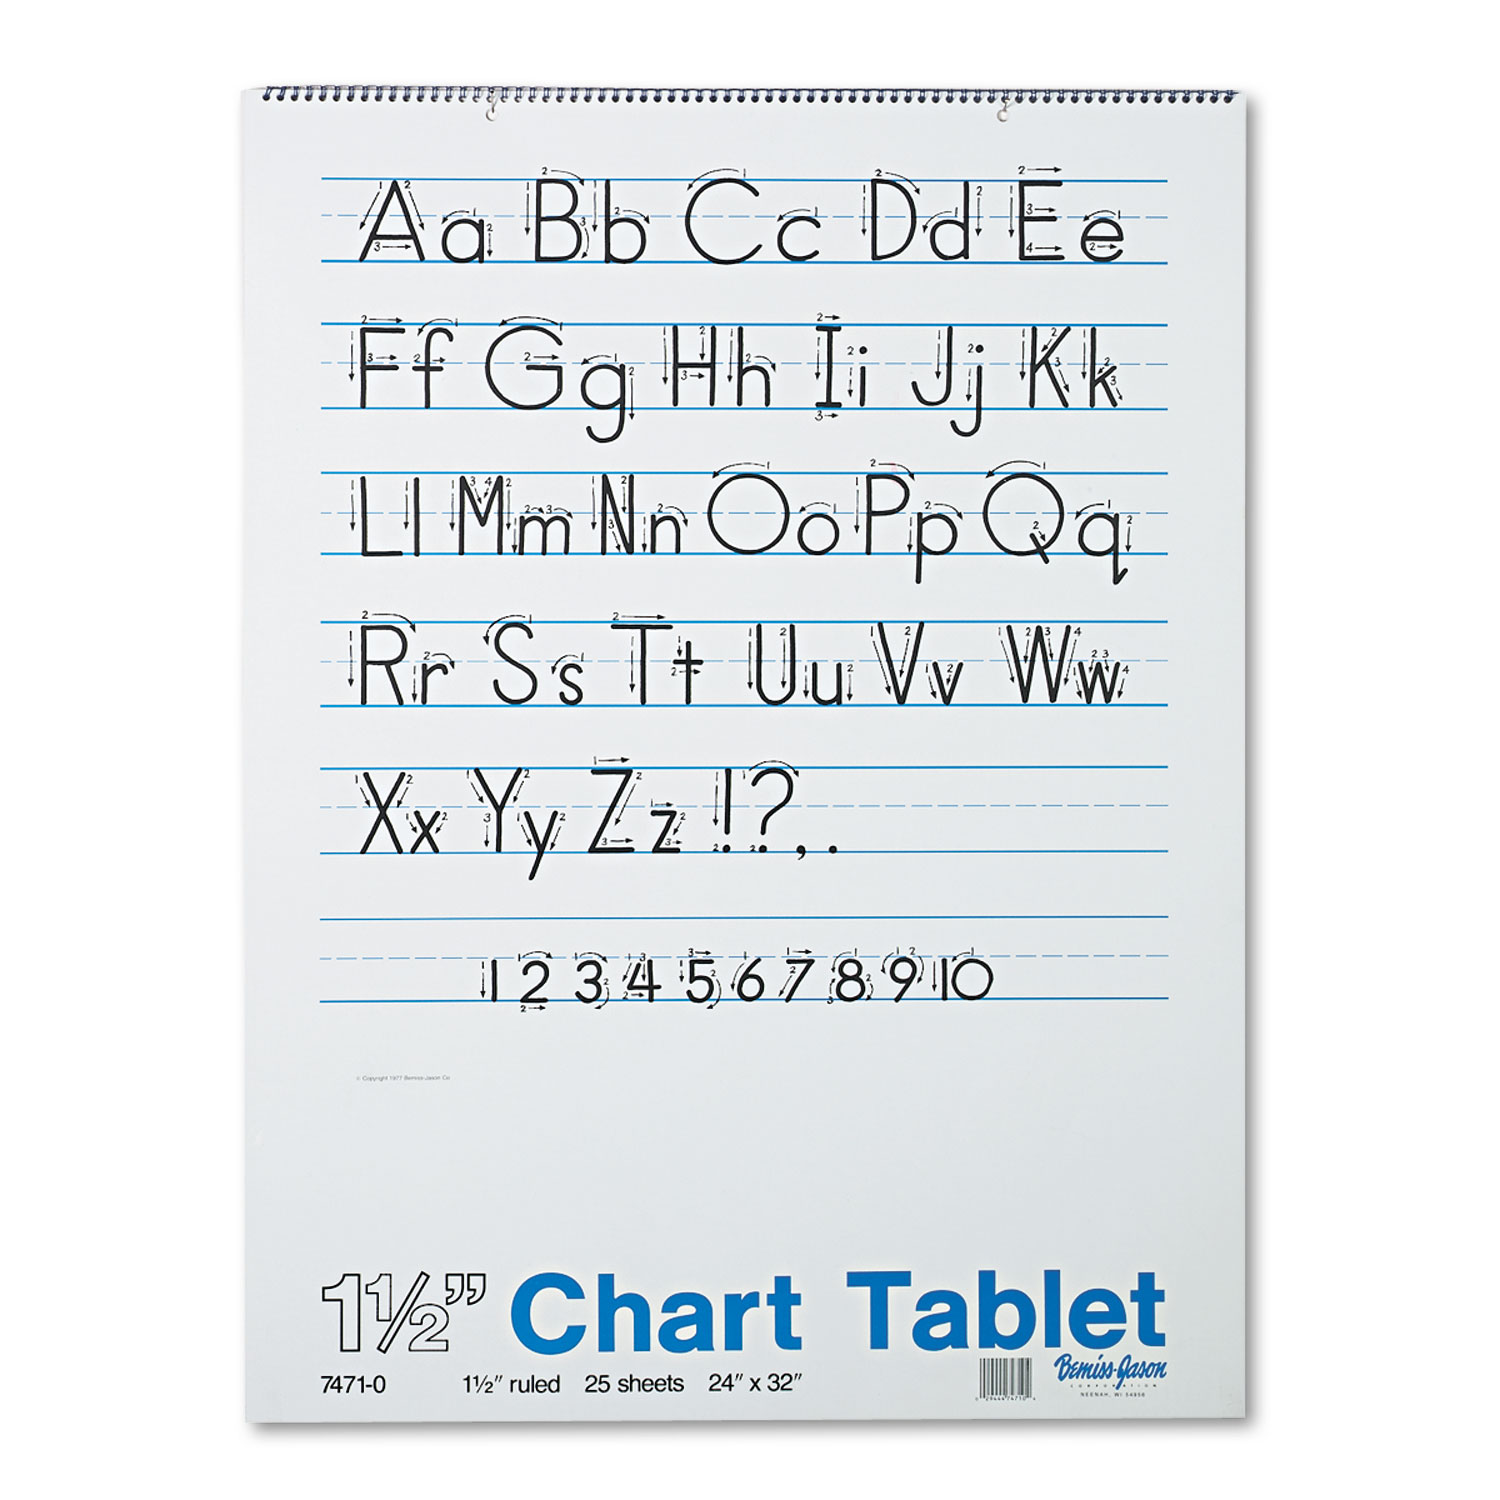  Pacon 74710 Chart Tablets, 1 1/2 Presentation Rule, 24 x 32, 25 Sheets (PAC74710) 